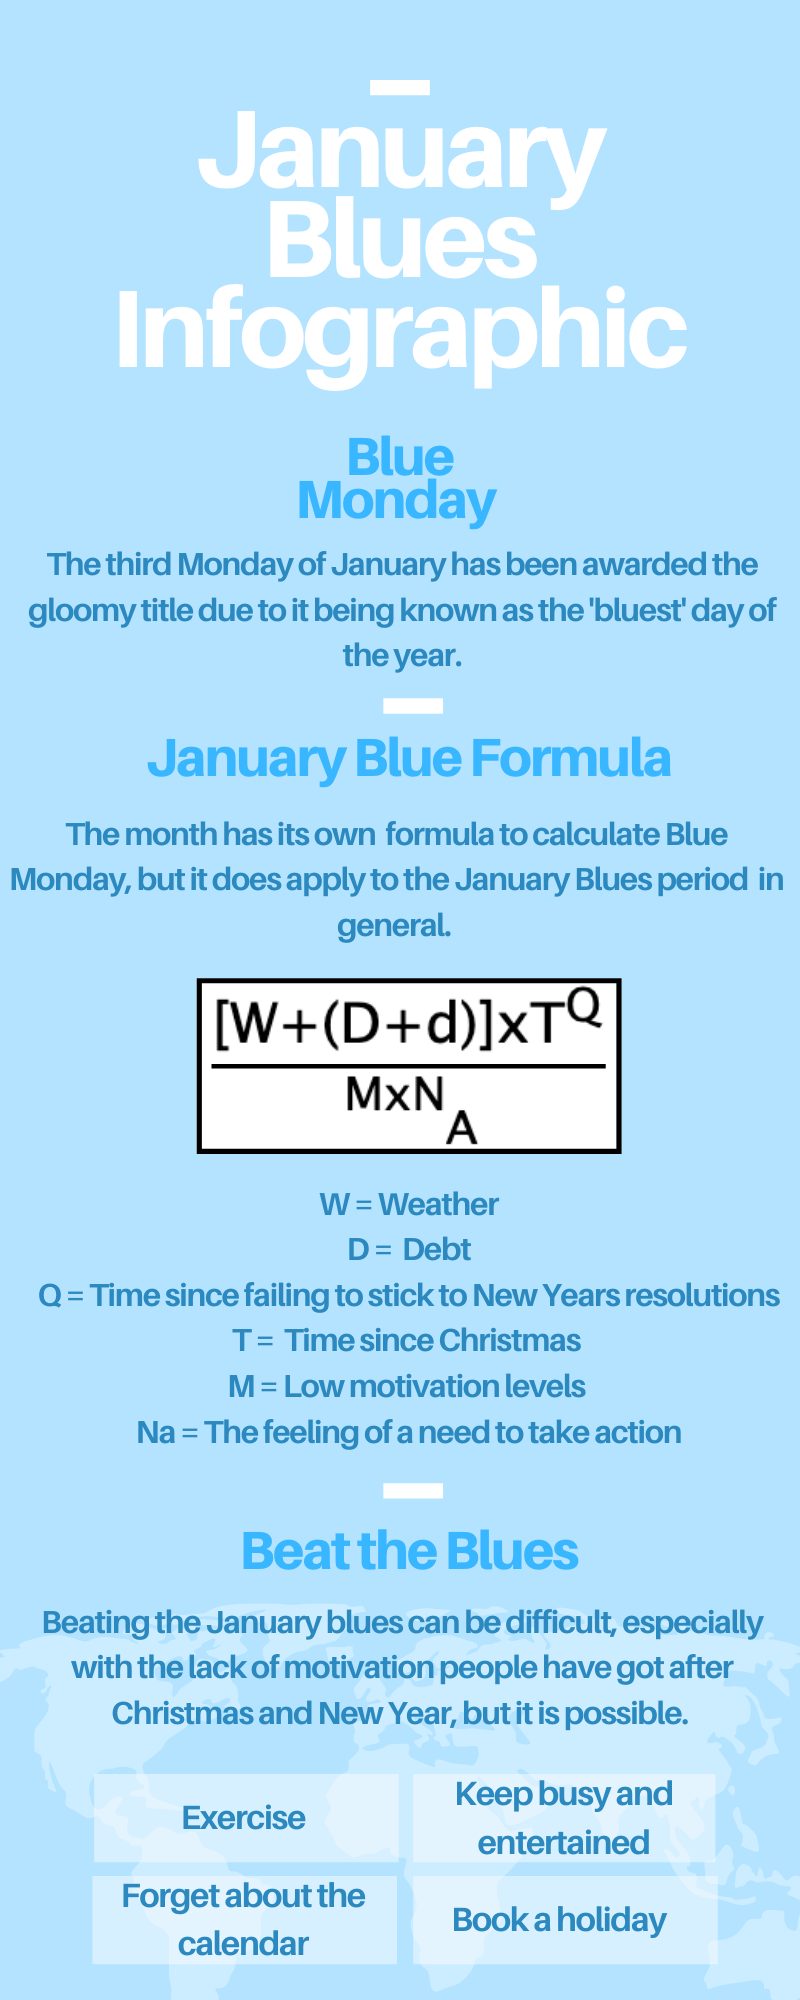 january blues | best the blues infographic